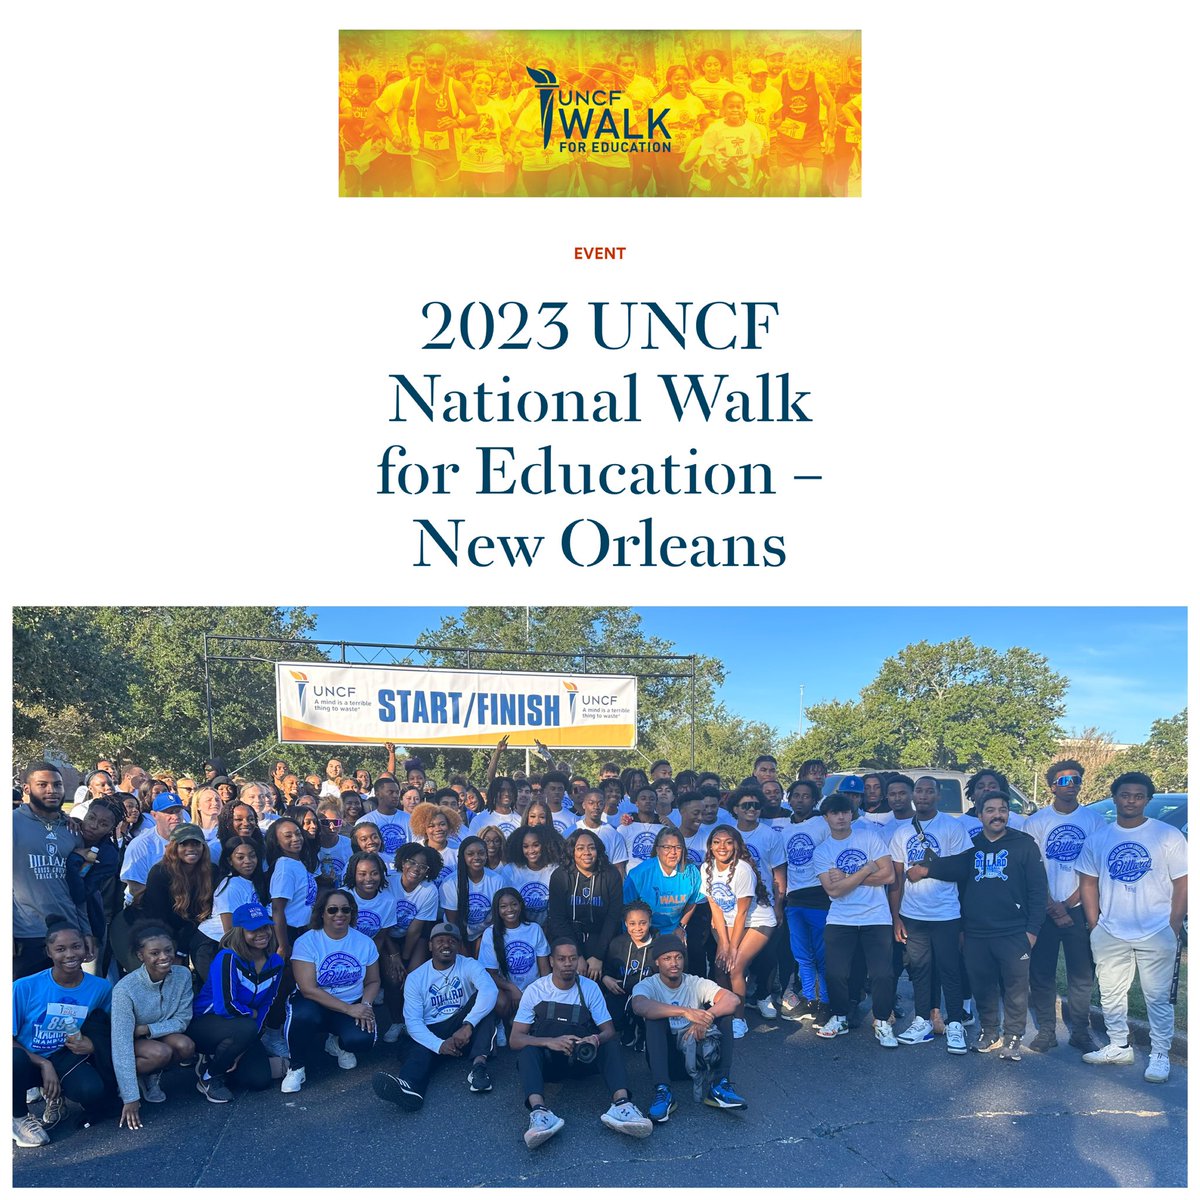 Thank you UNCF for all that you do!  The UNCF in New Orleans Walk is about helping raise funds to support HBCUs and students. UNCF is committed to transforming Black higher education in America. #Duathletics #higheducation #bleudevils #UNCF